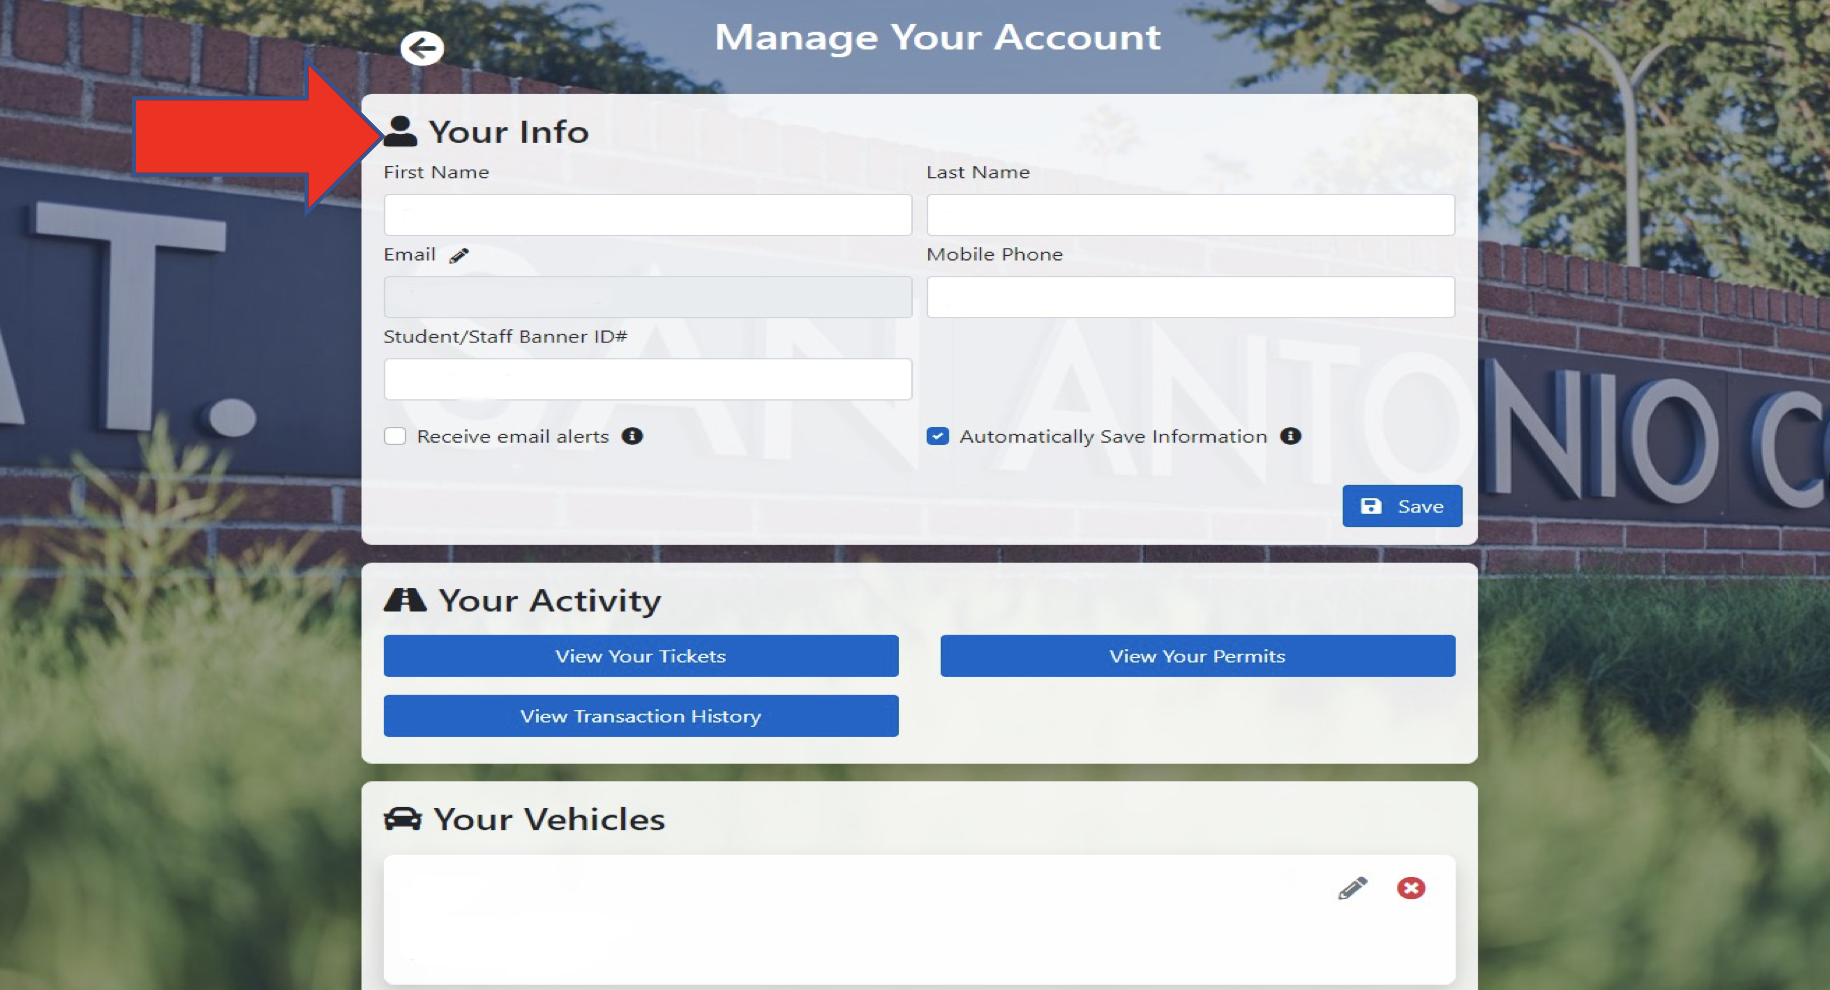 Step 8: Complete your account profile